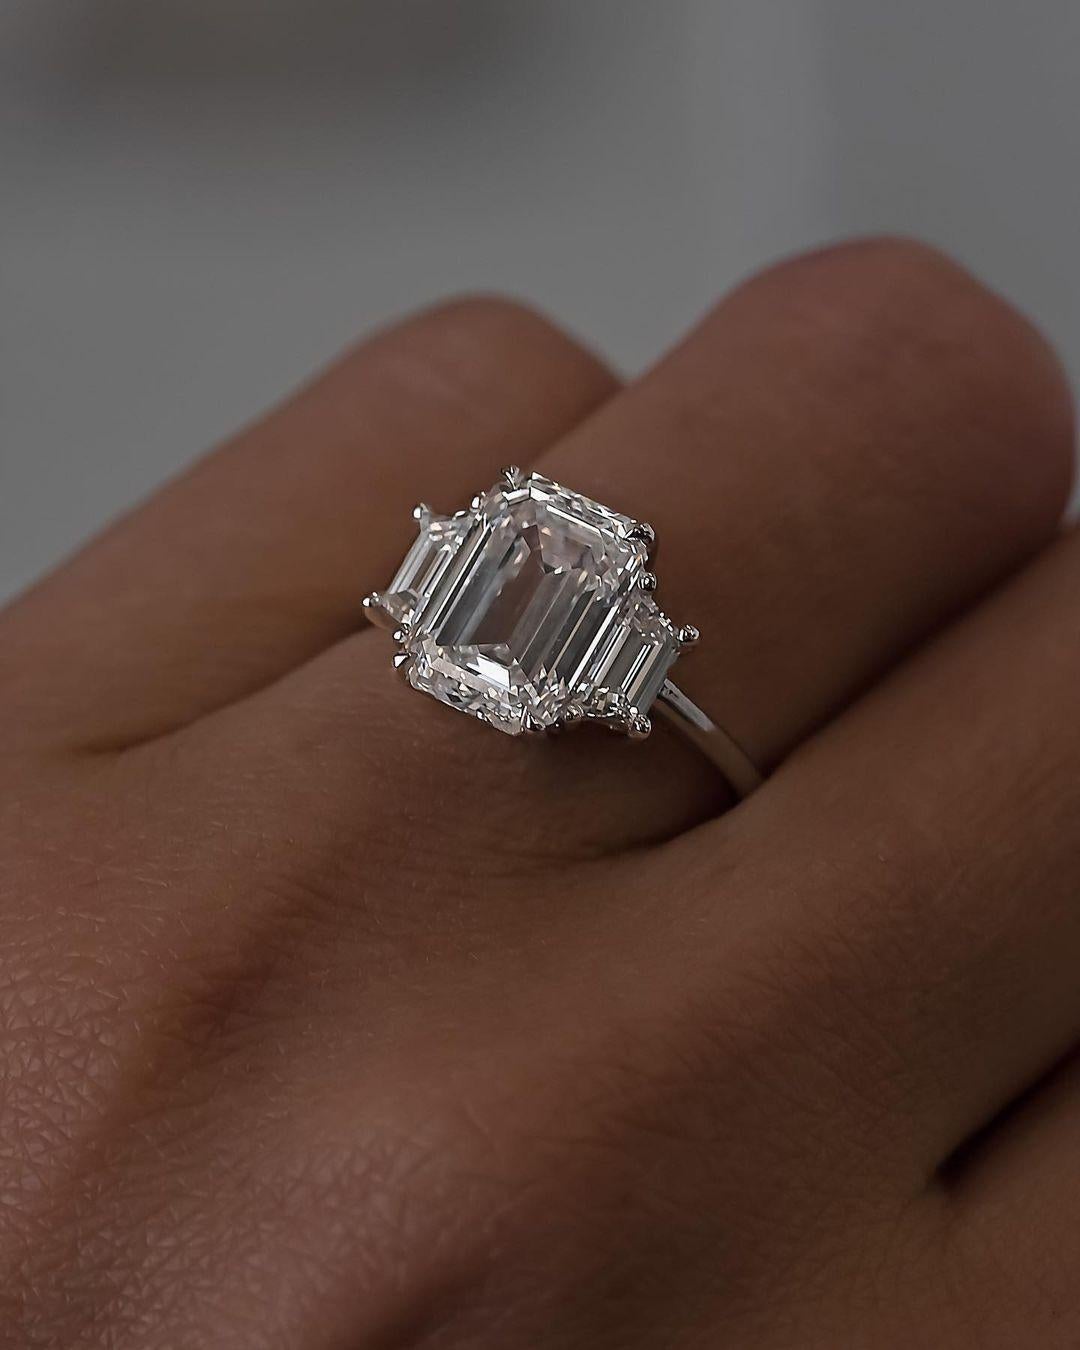 Beautiful ring in solid 18kt white gold, its 2 carat main stone is graded D color and VVS1 in clarity.

Stones with this type of qualification by GIA are very white and have no inclusion, which is highly appreciated in the emerald cut diamonds.

The